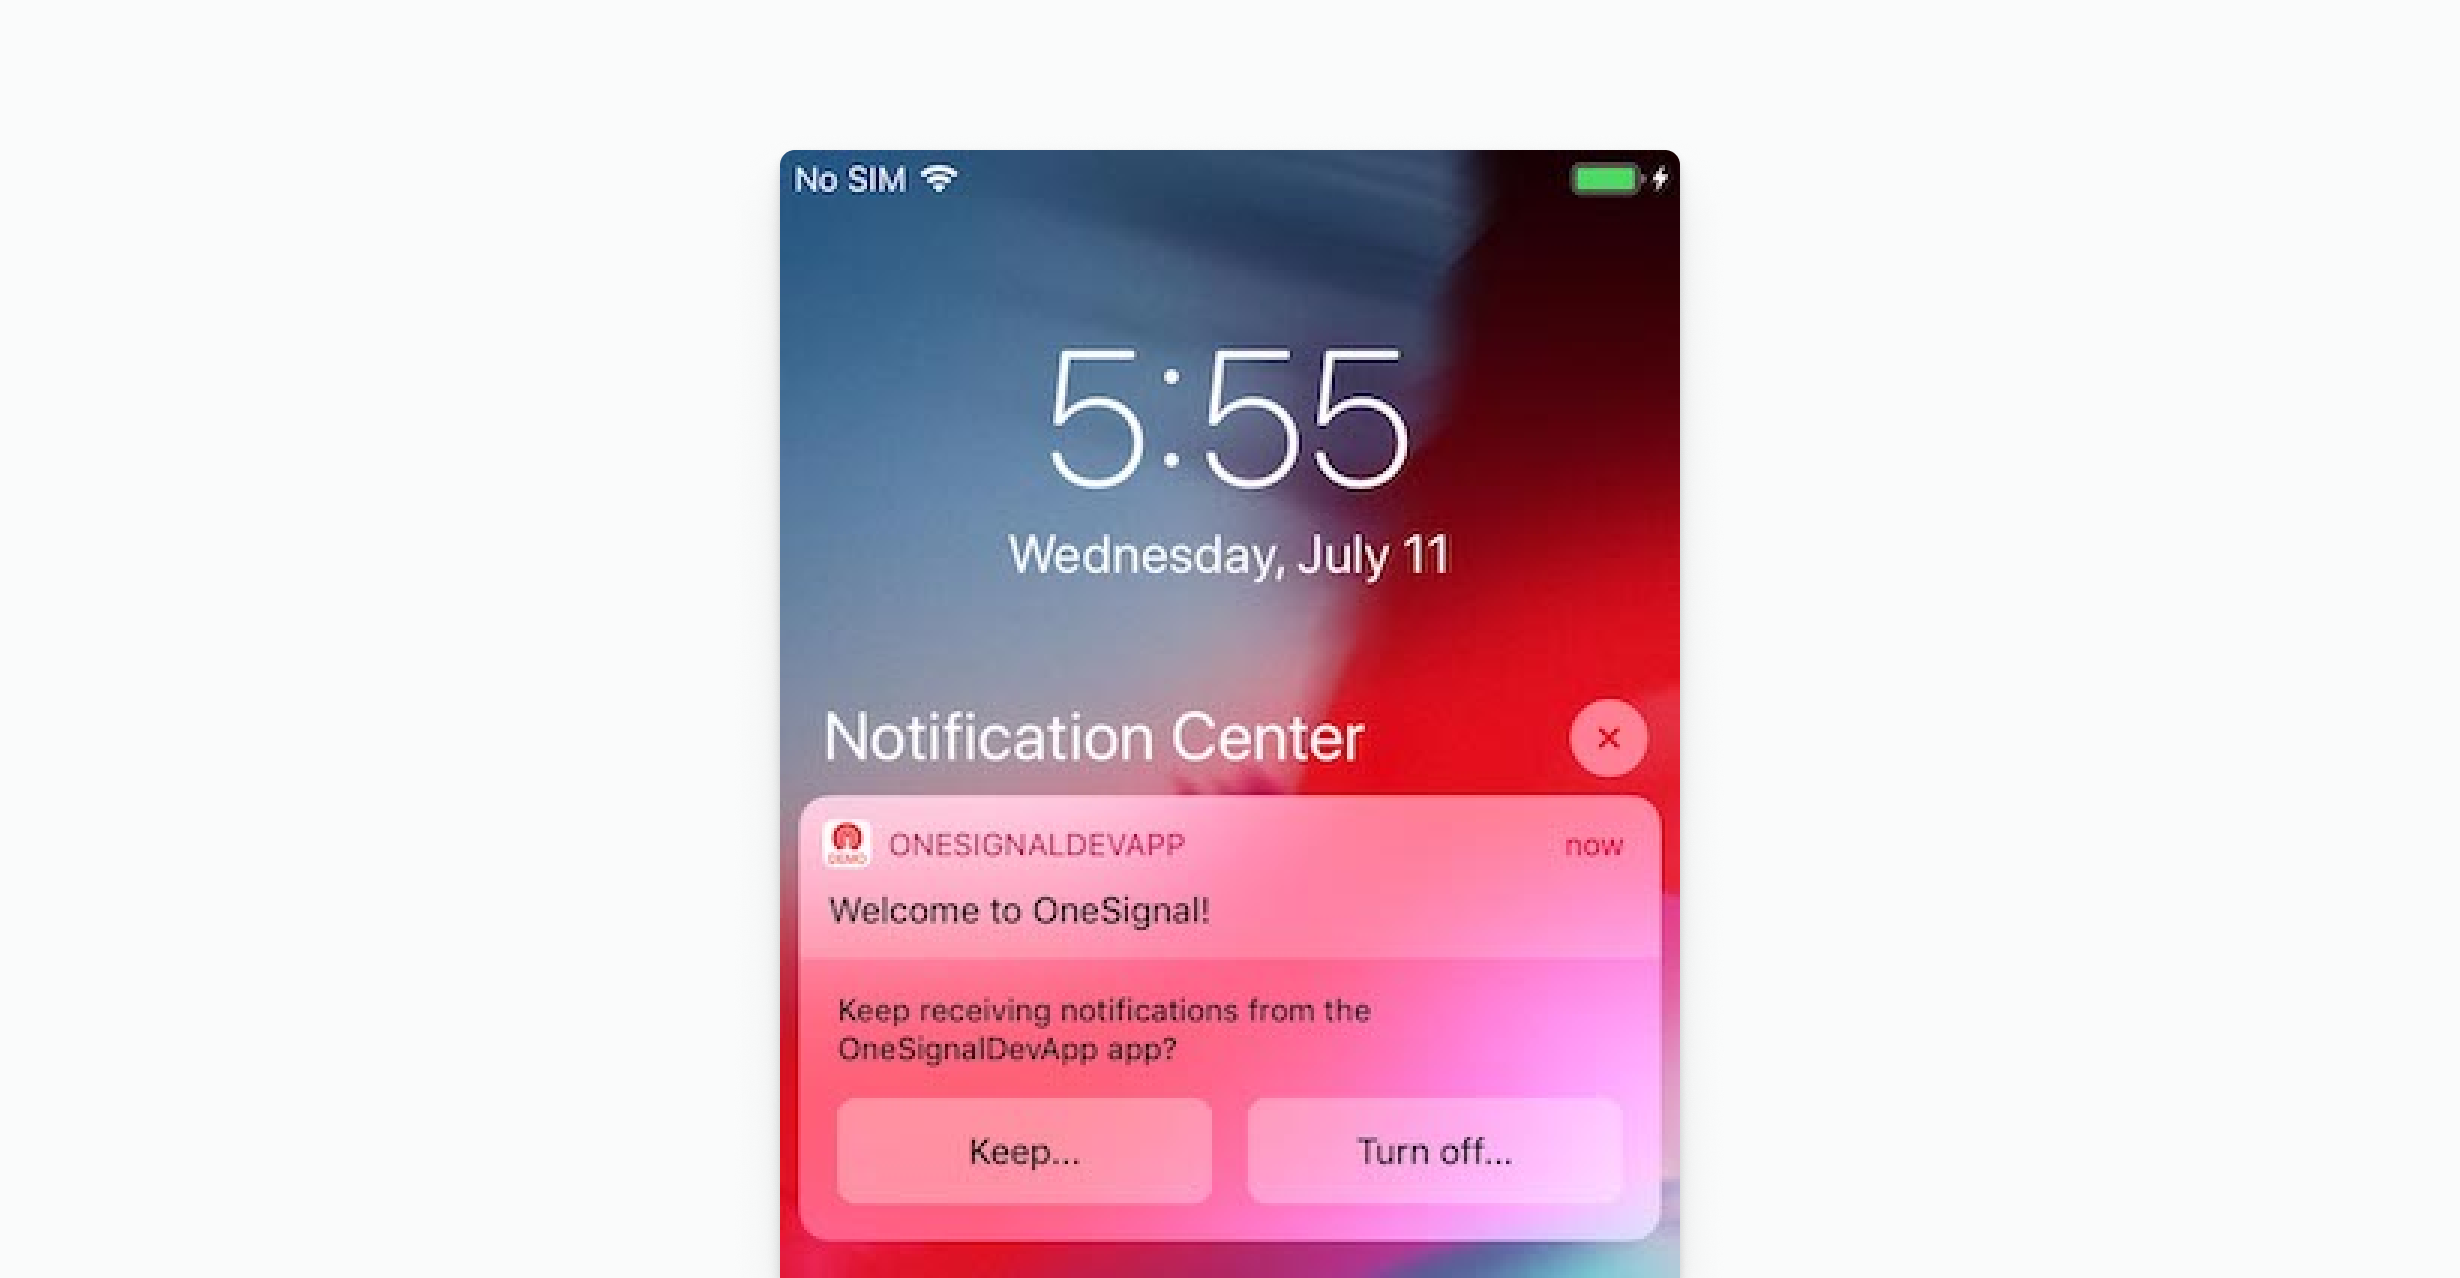 Images shows provisional notification prompting user to keep notifications available from provider